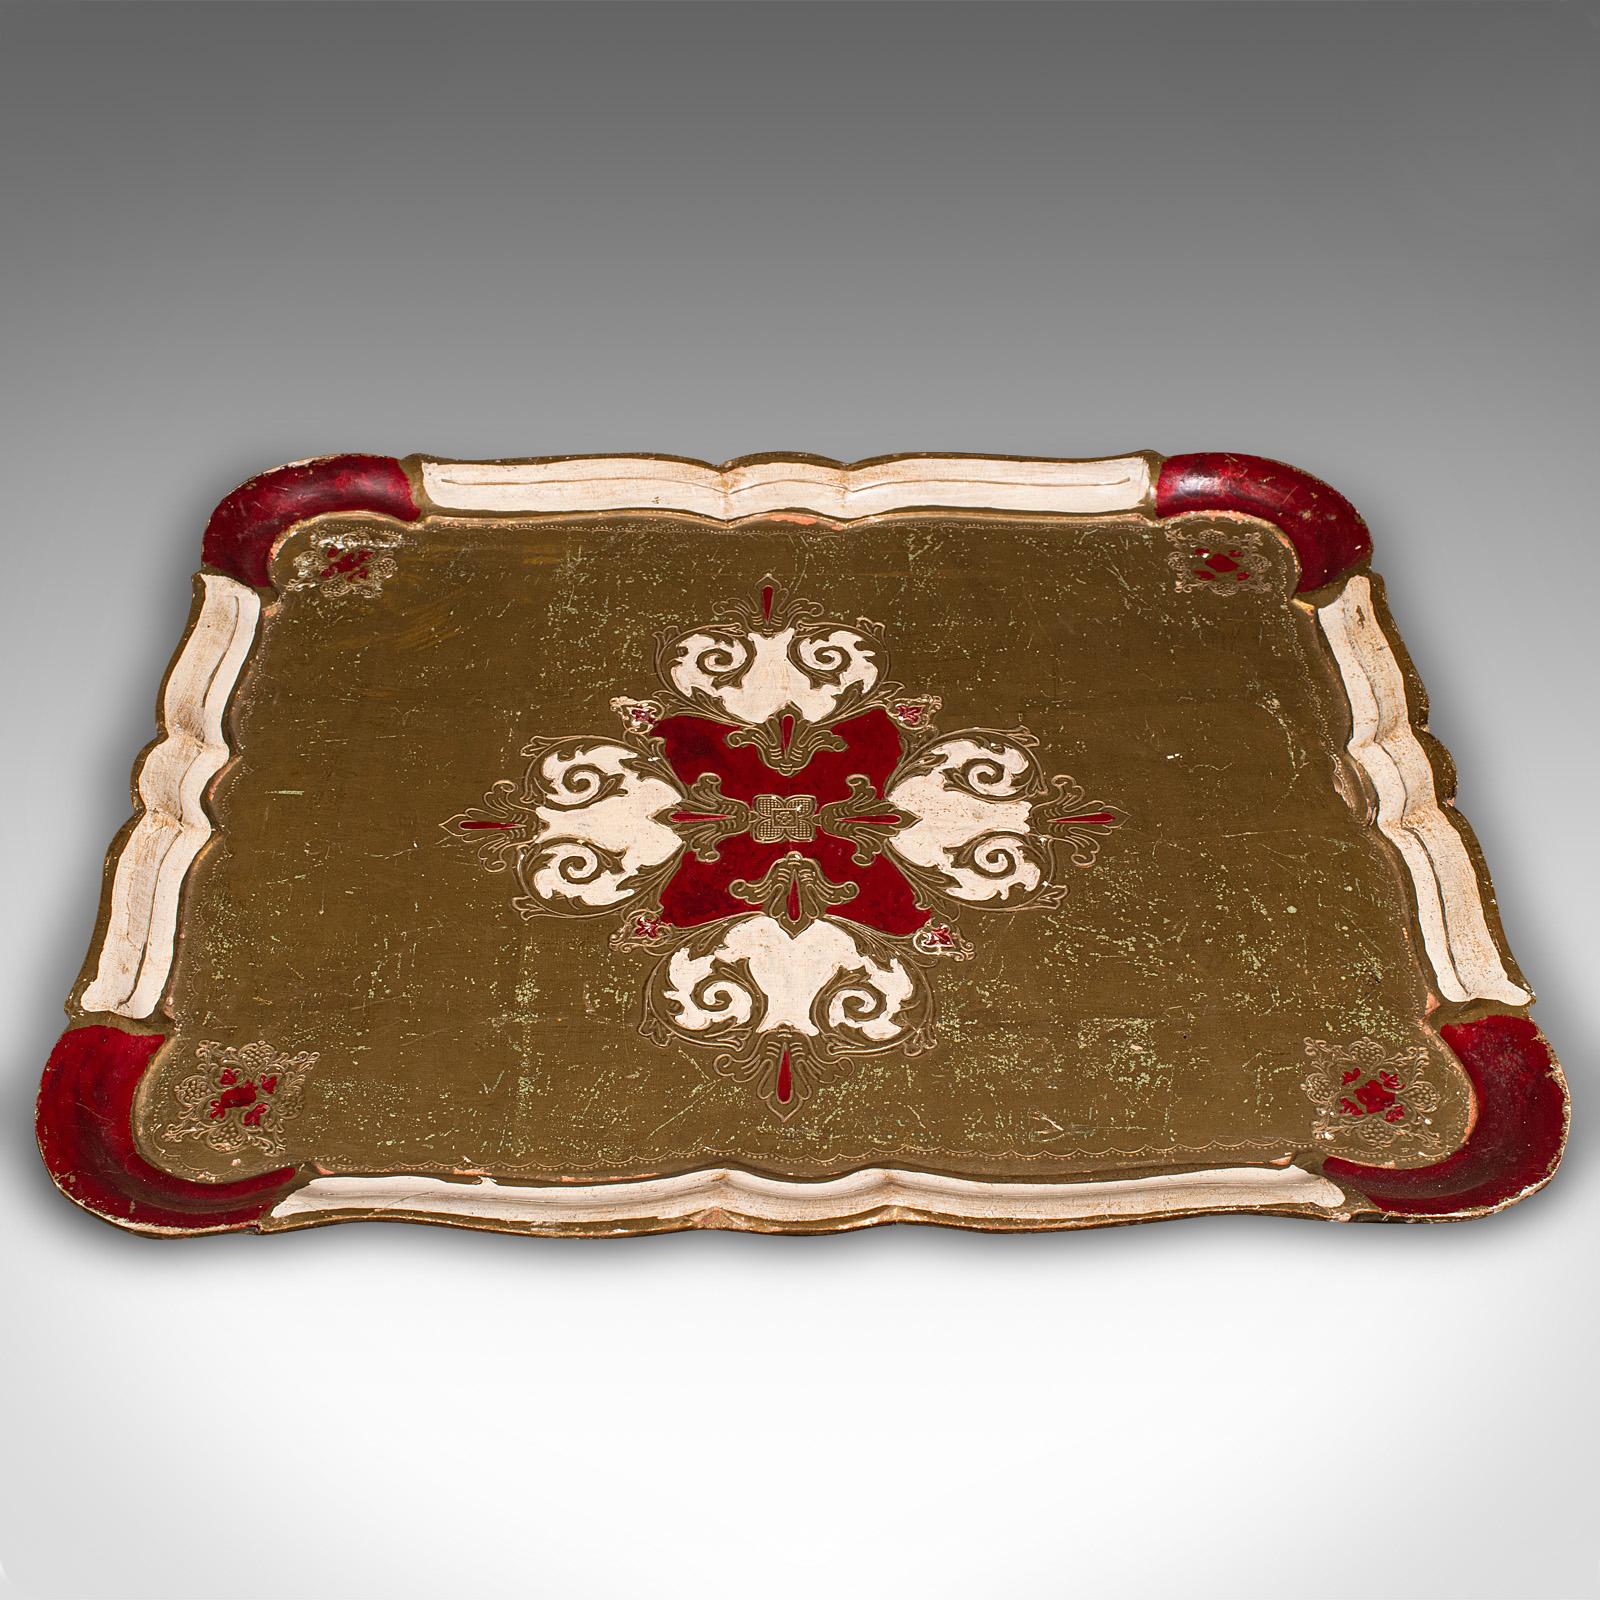 This is a vintage decorative tea tray. An Italian, gilt finished serving platter with Baroque revival taste, dating to the mid 20th century, circa 1950.
 
Striking colour and tonality creates a distinctive appearance
Displays a desirable aged